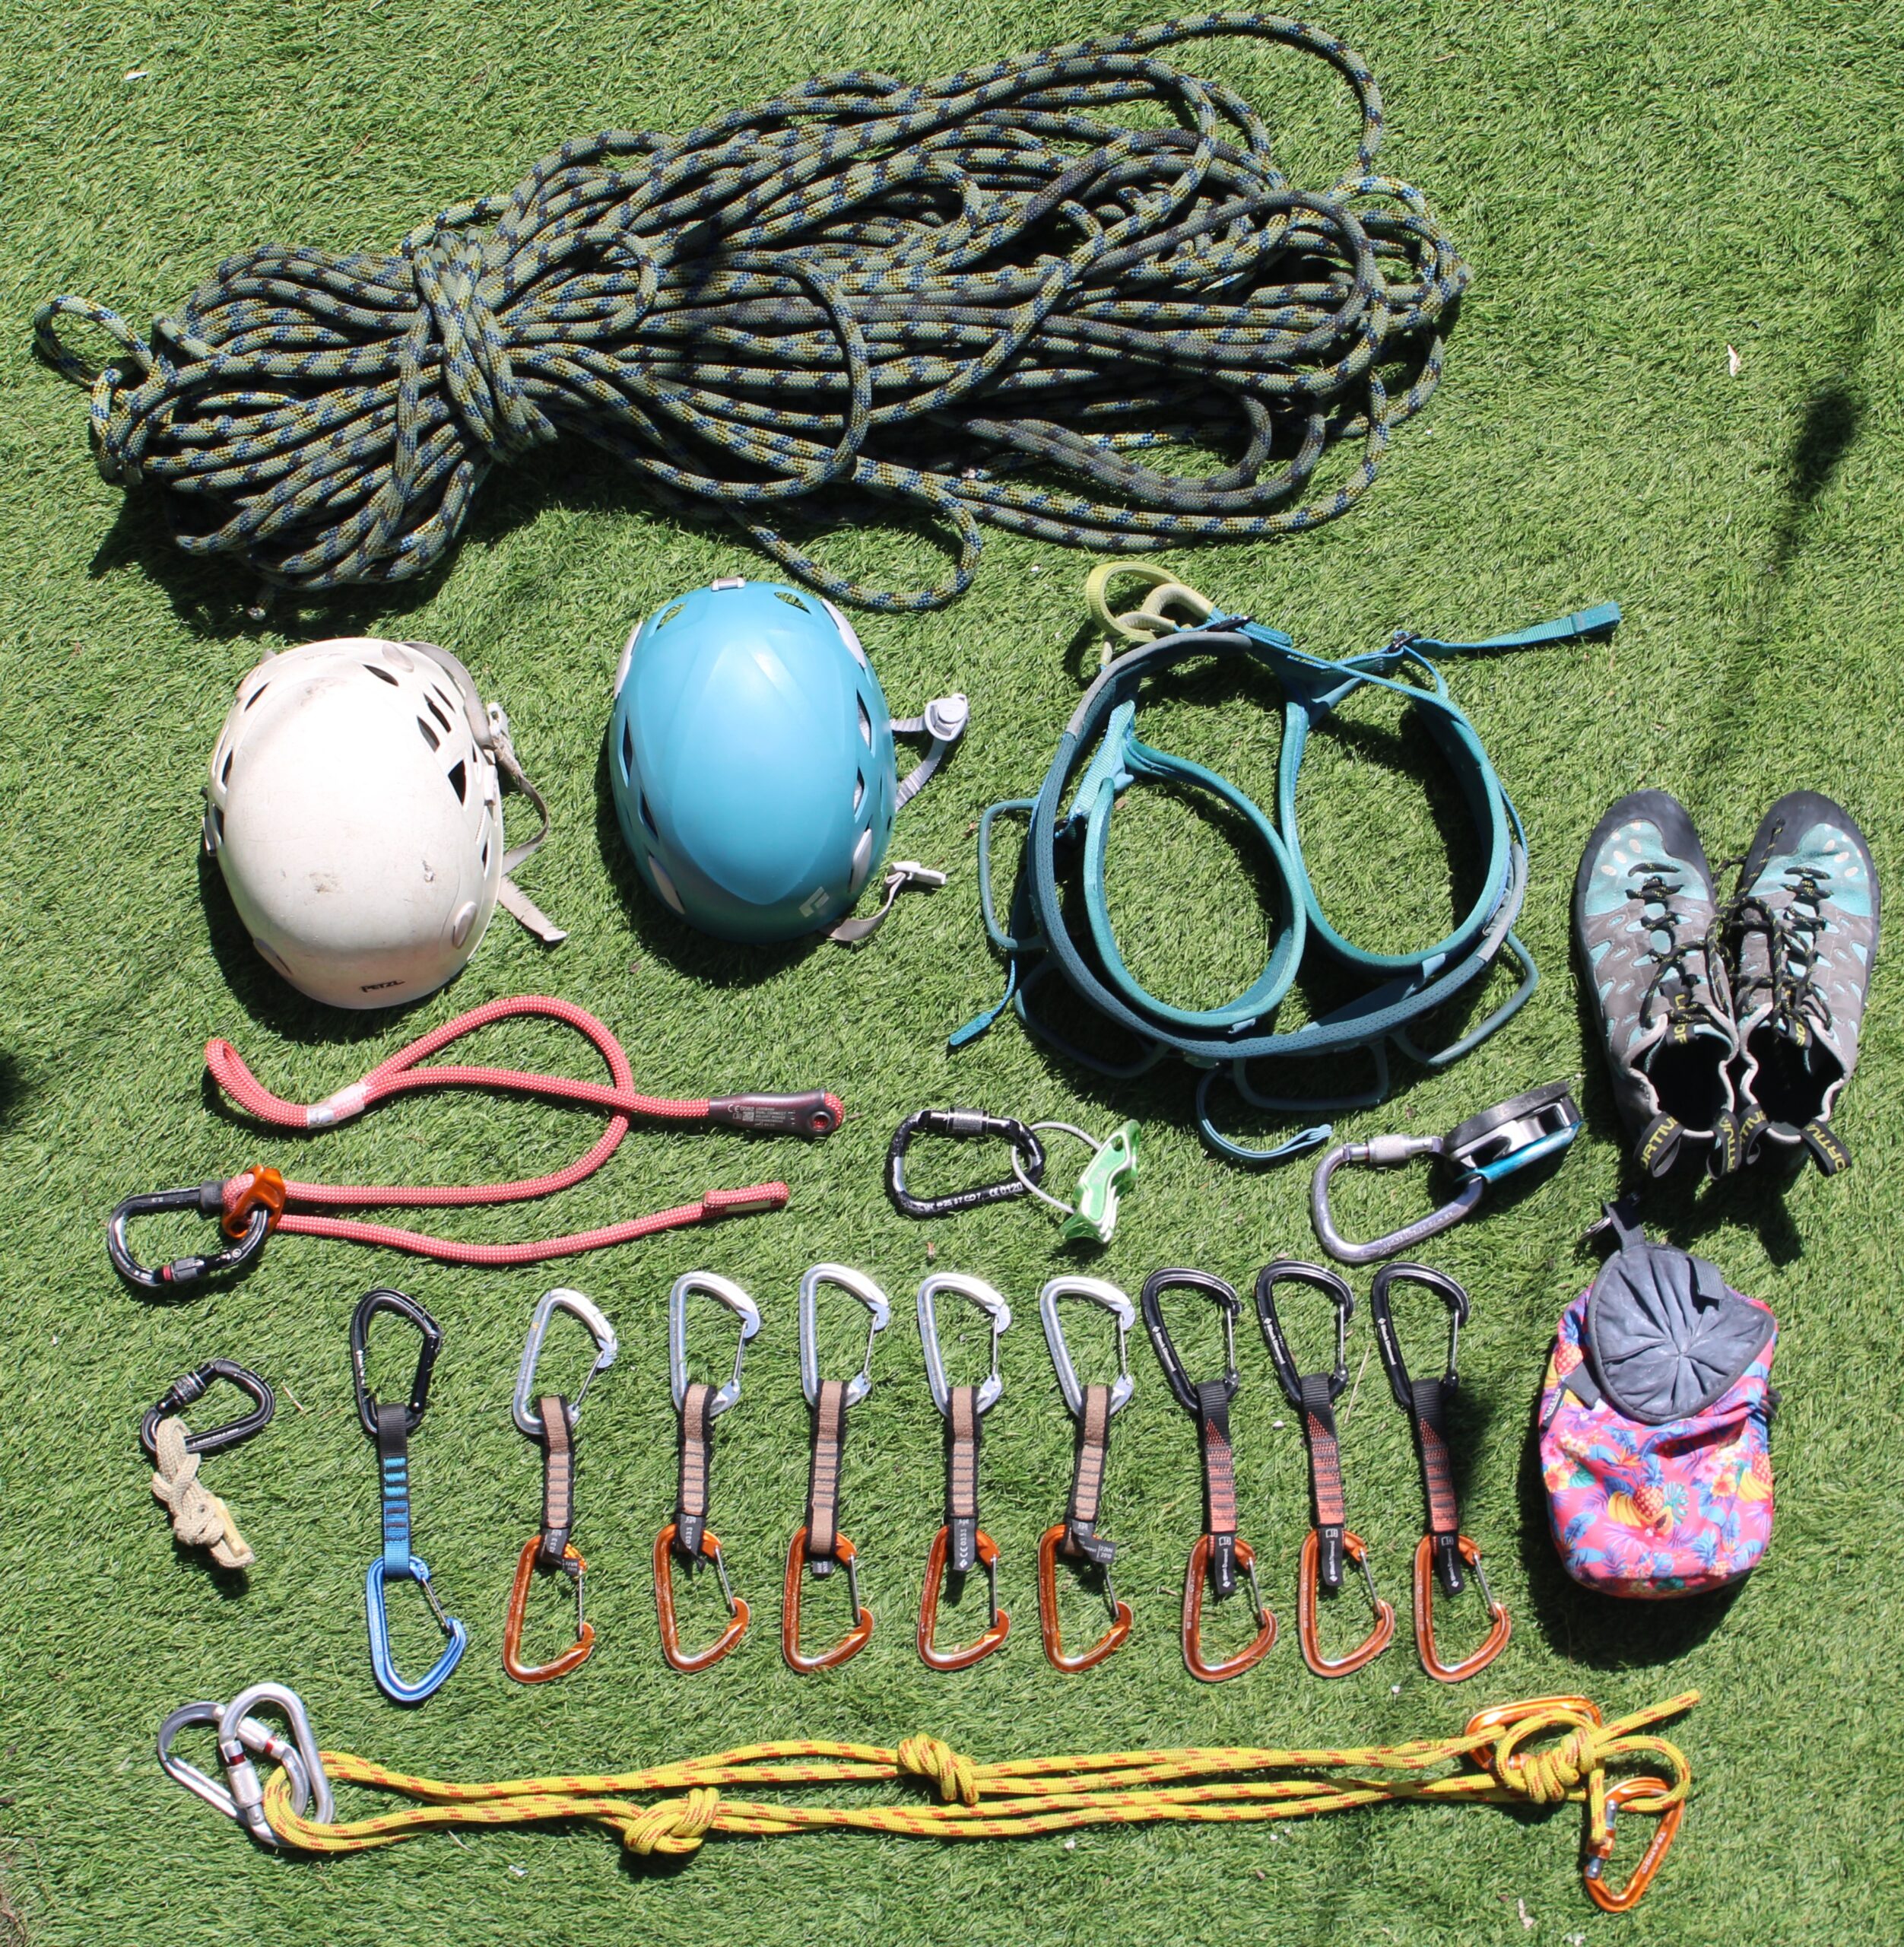 Introduction to sport climbing gear 